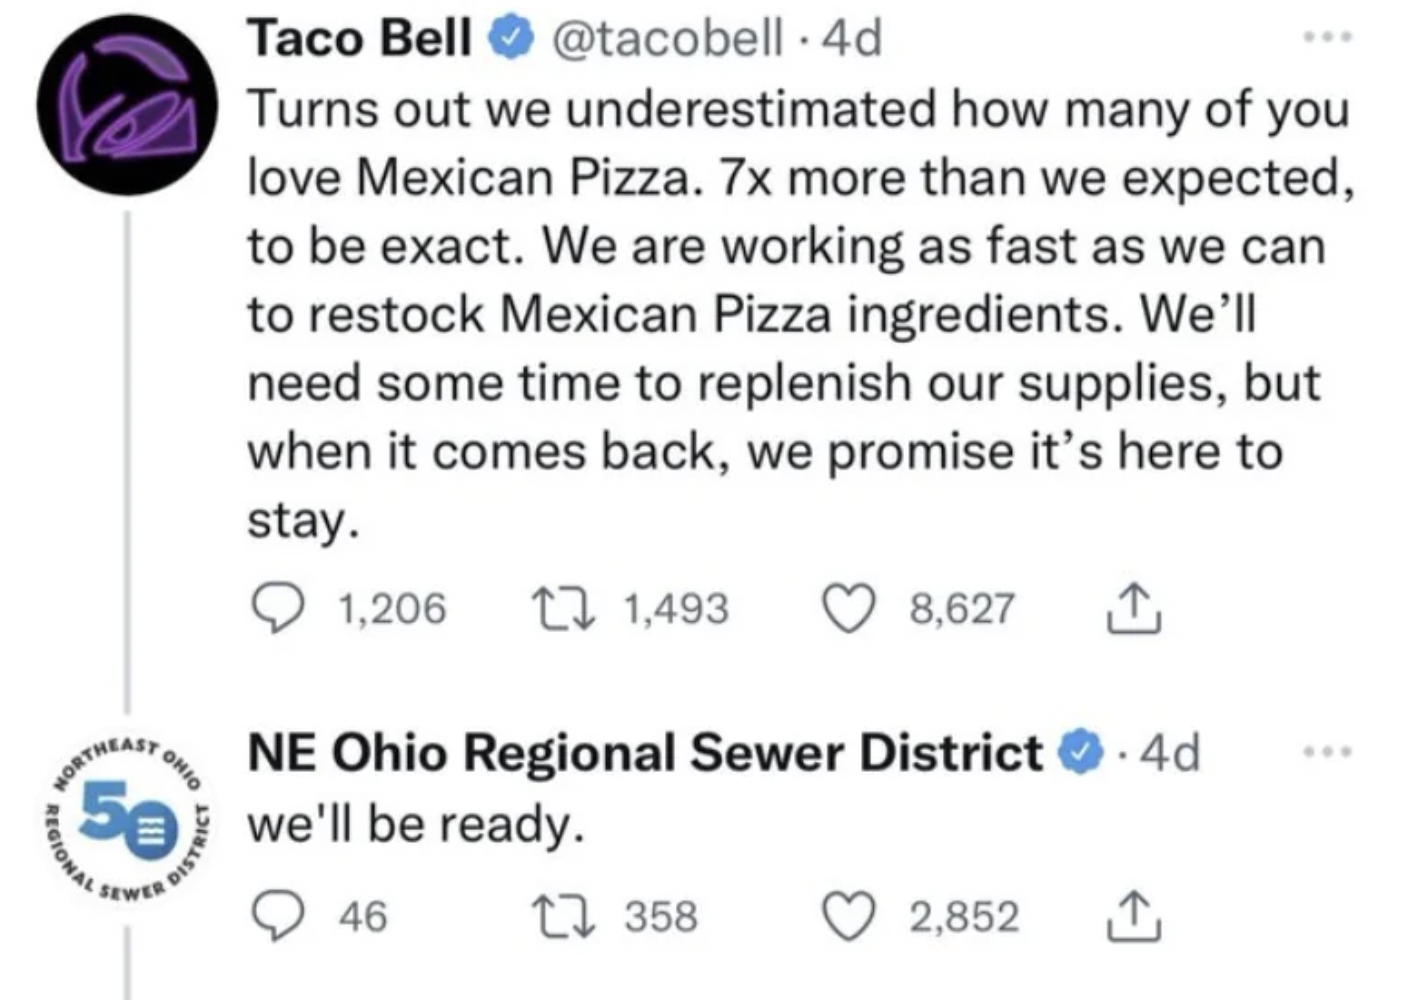 ohio sewer district taco bell - Taco Bell 4d . Turns out we underestimated how many of you love Mexican Pizza. 7x more than we expected, to be exact. We are working as fast as we can to restock Mexican Pizza ingredients. We'll need some time to replenish 